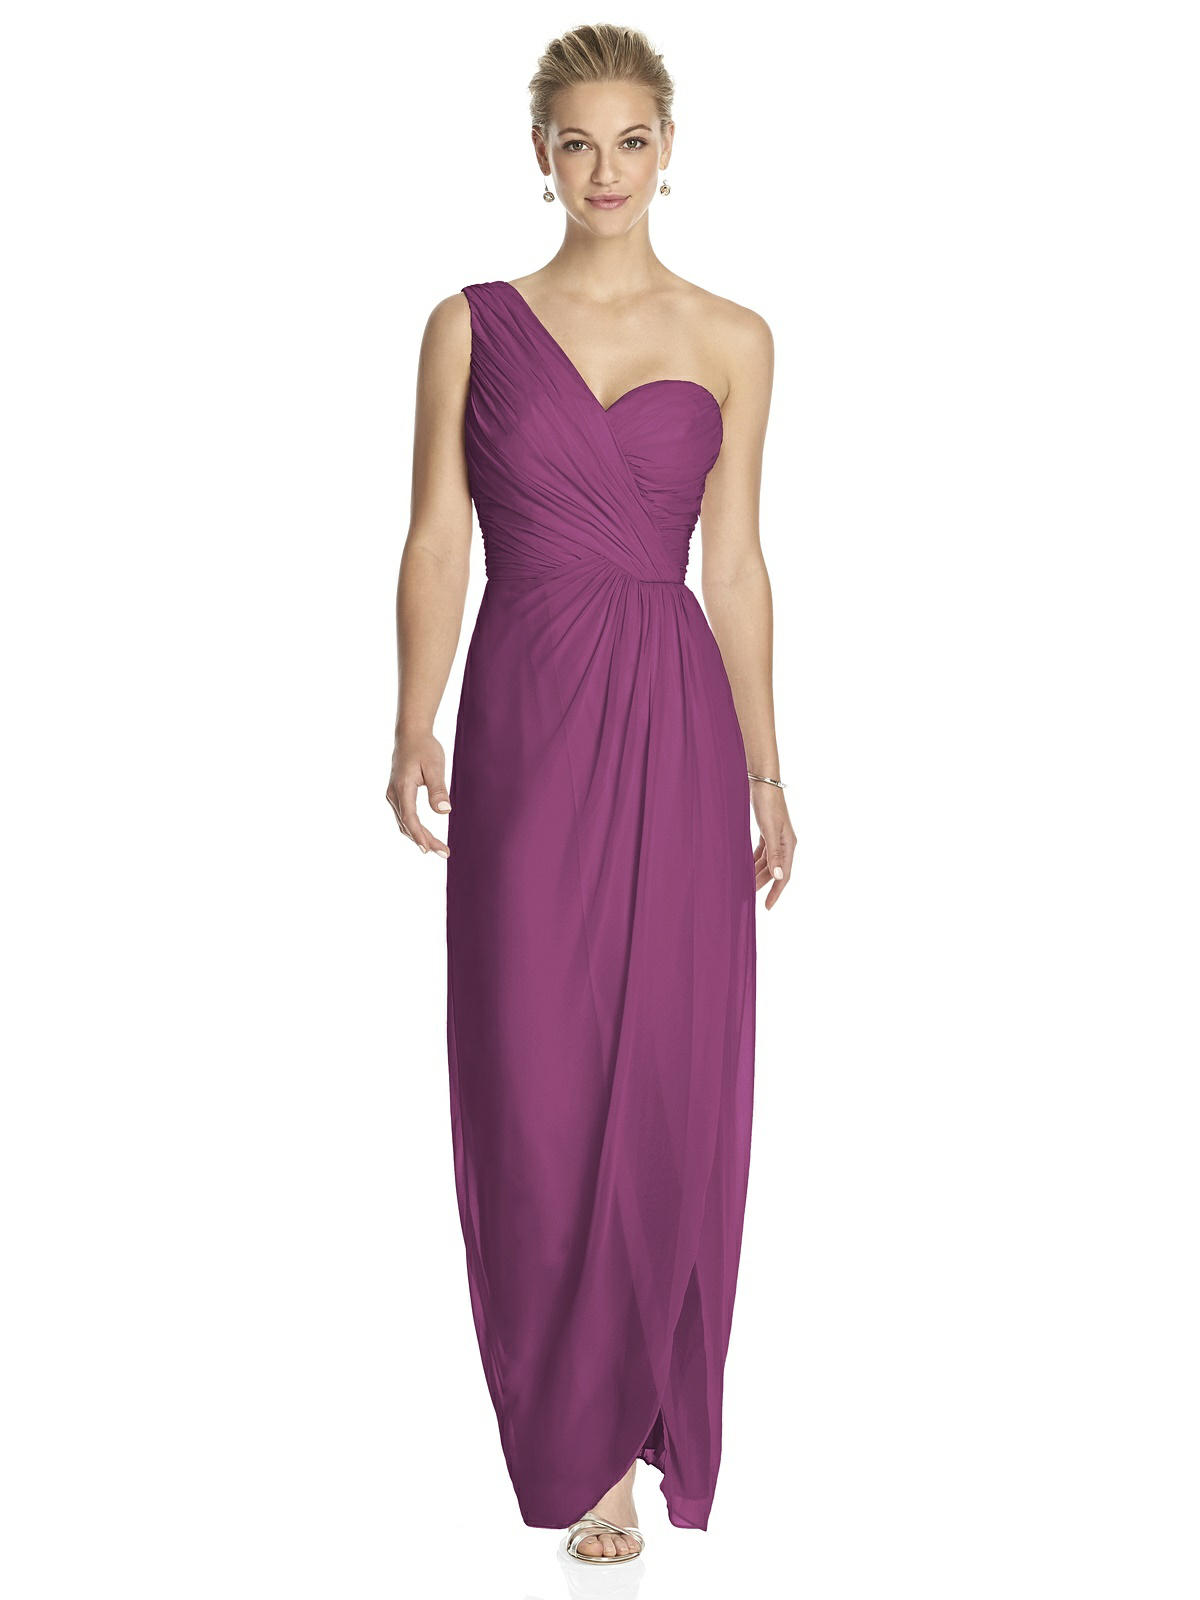 Dessy Bridesmaid Dresses Size Chart - Ficts